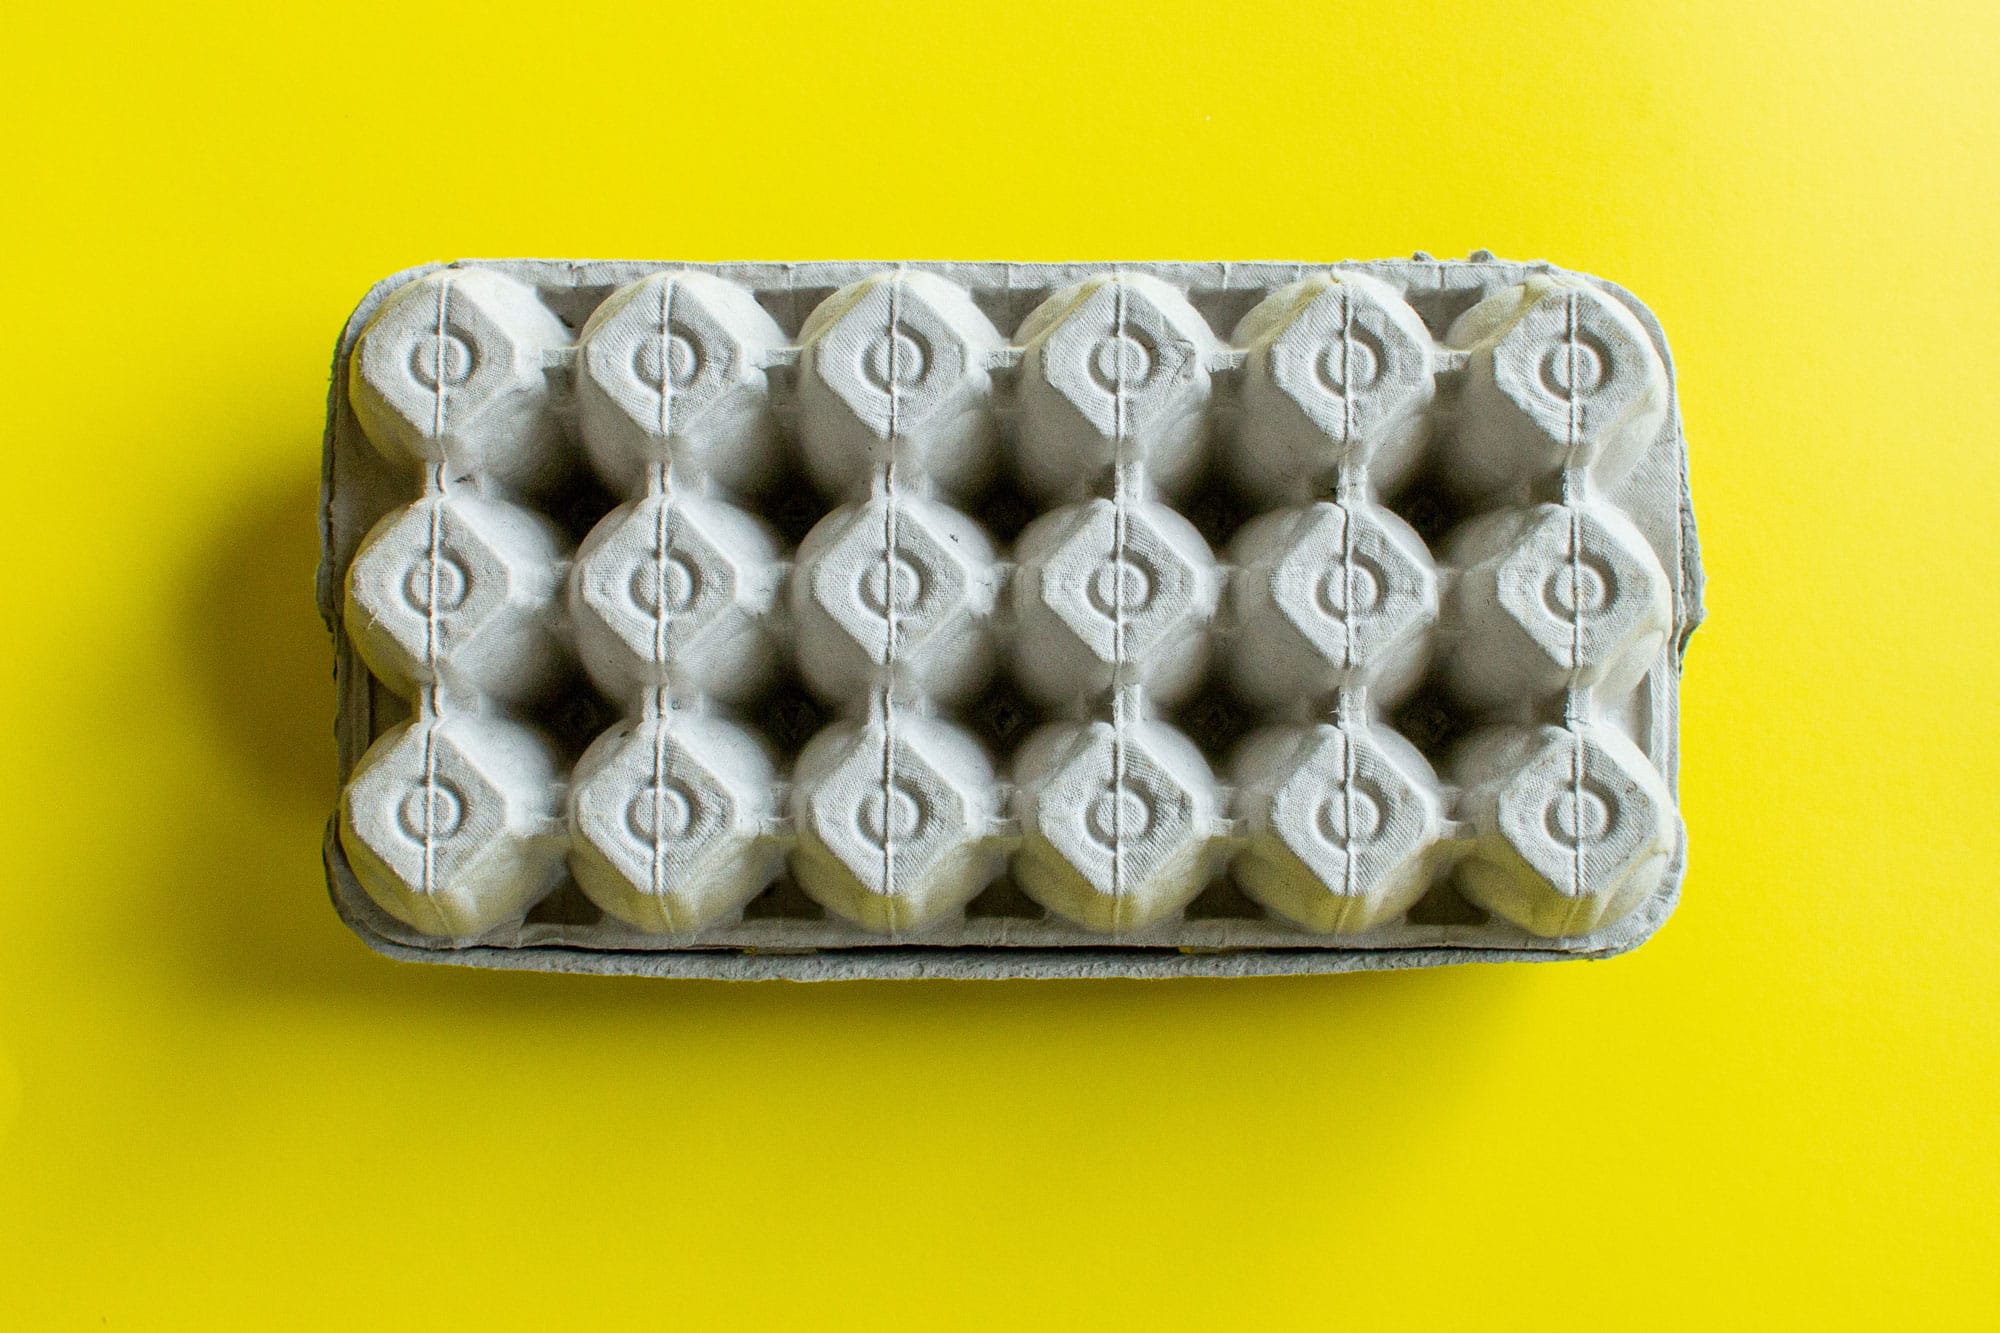 18 Count Egg Cartons: One of the World's Largest Egg Suppliers